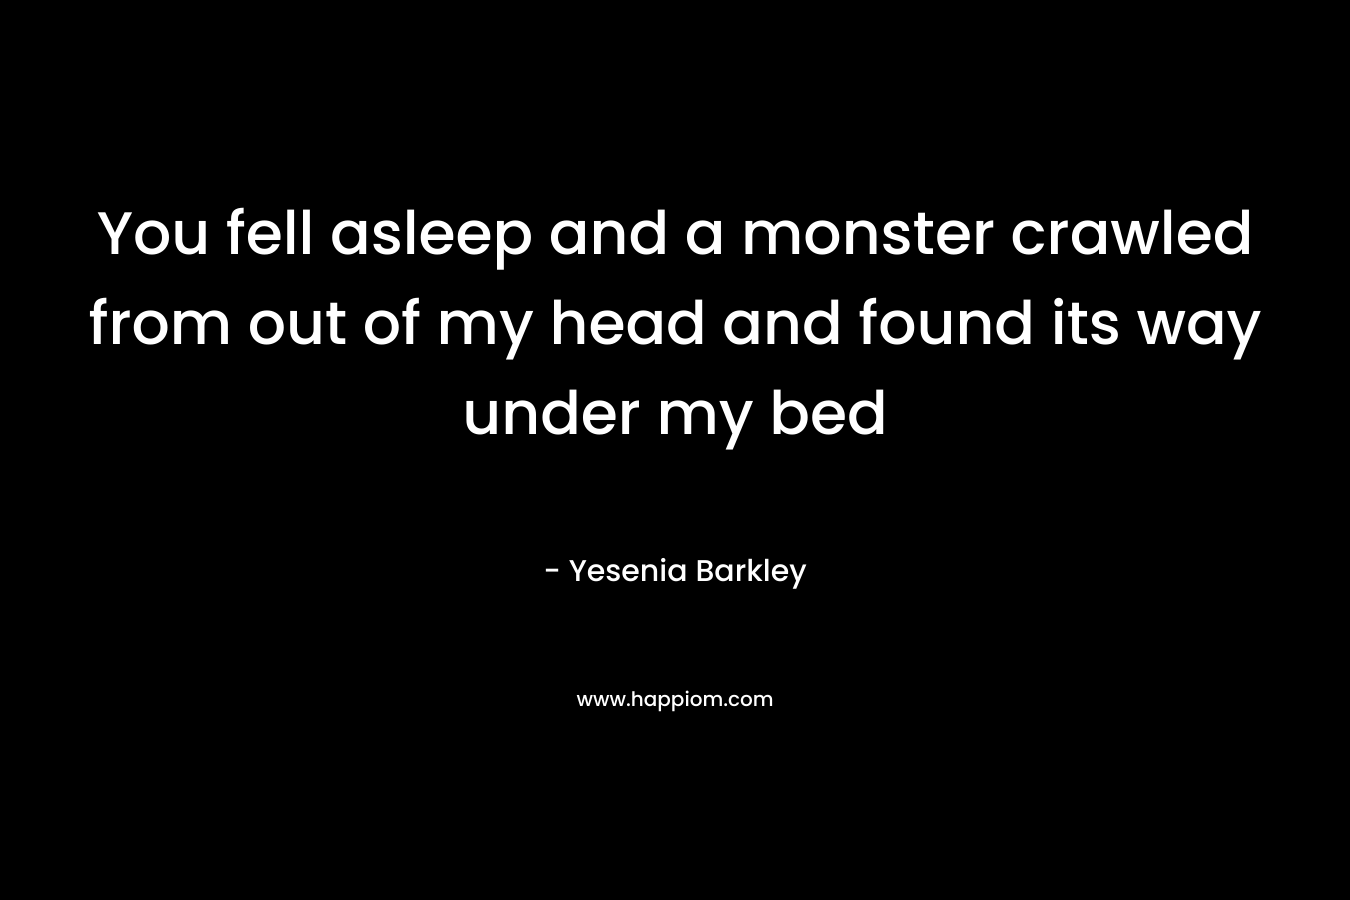 You fell asleep and a monster crawled from out of my head and found its way under my bed – Yesenia Barkley